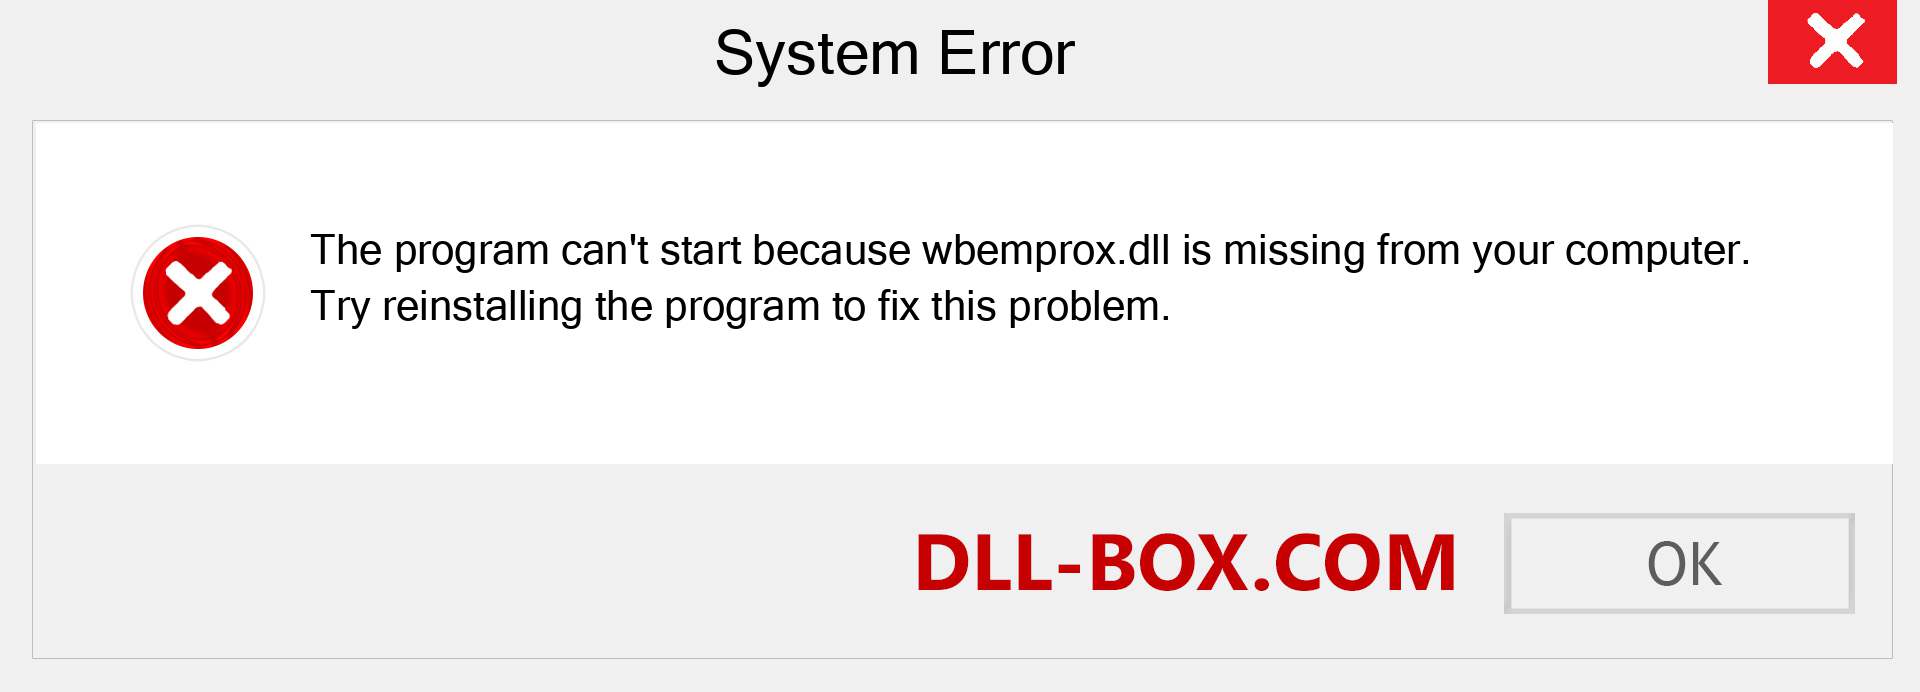  wbemprox.dll file is missing?. Download for Windows 7, 8, 10 - Fix  wbemprox dll Missing Error on Windows, photos, images